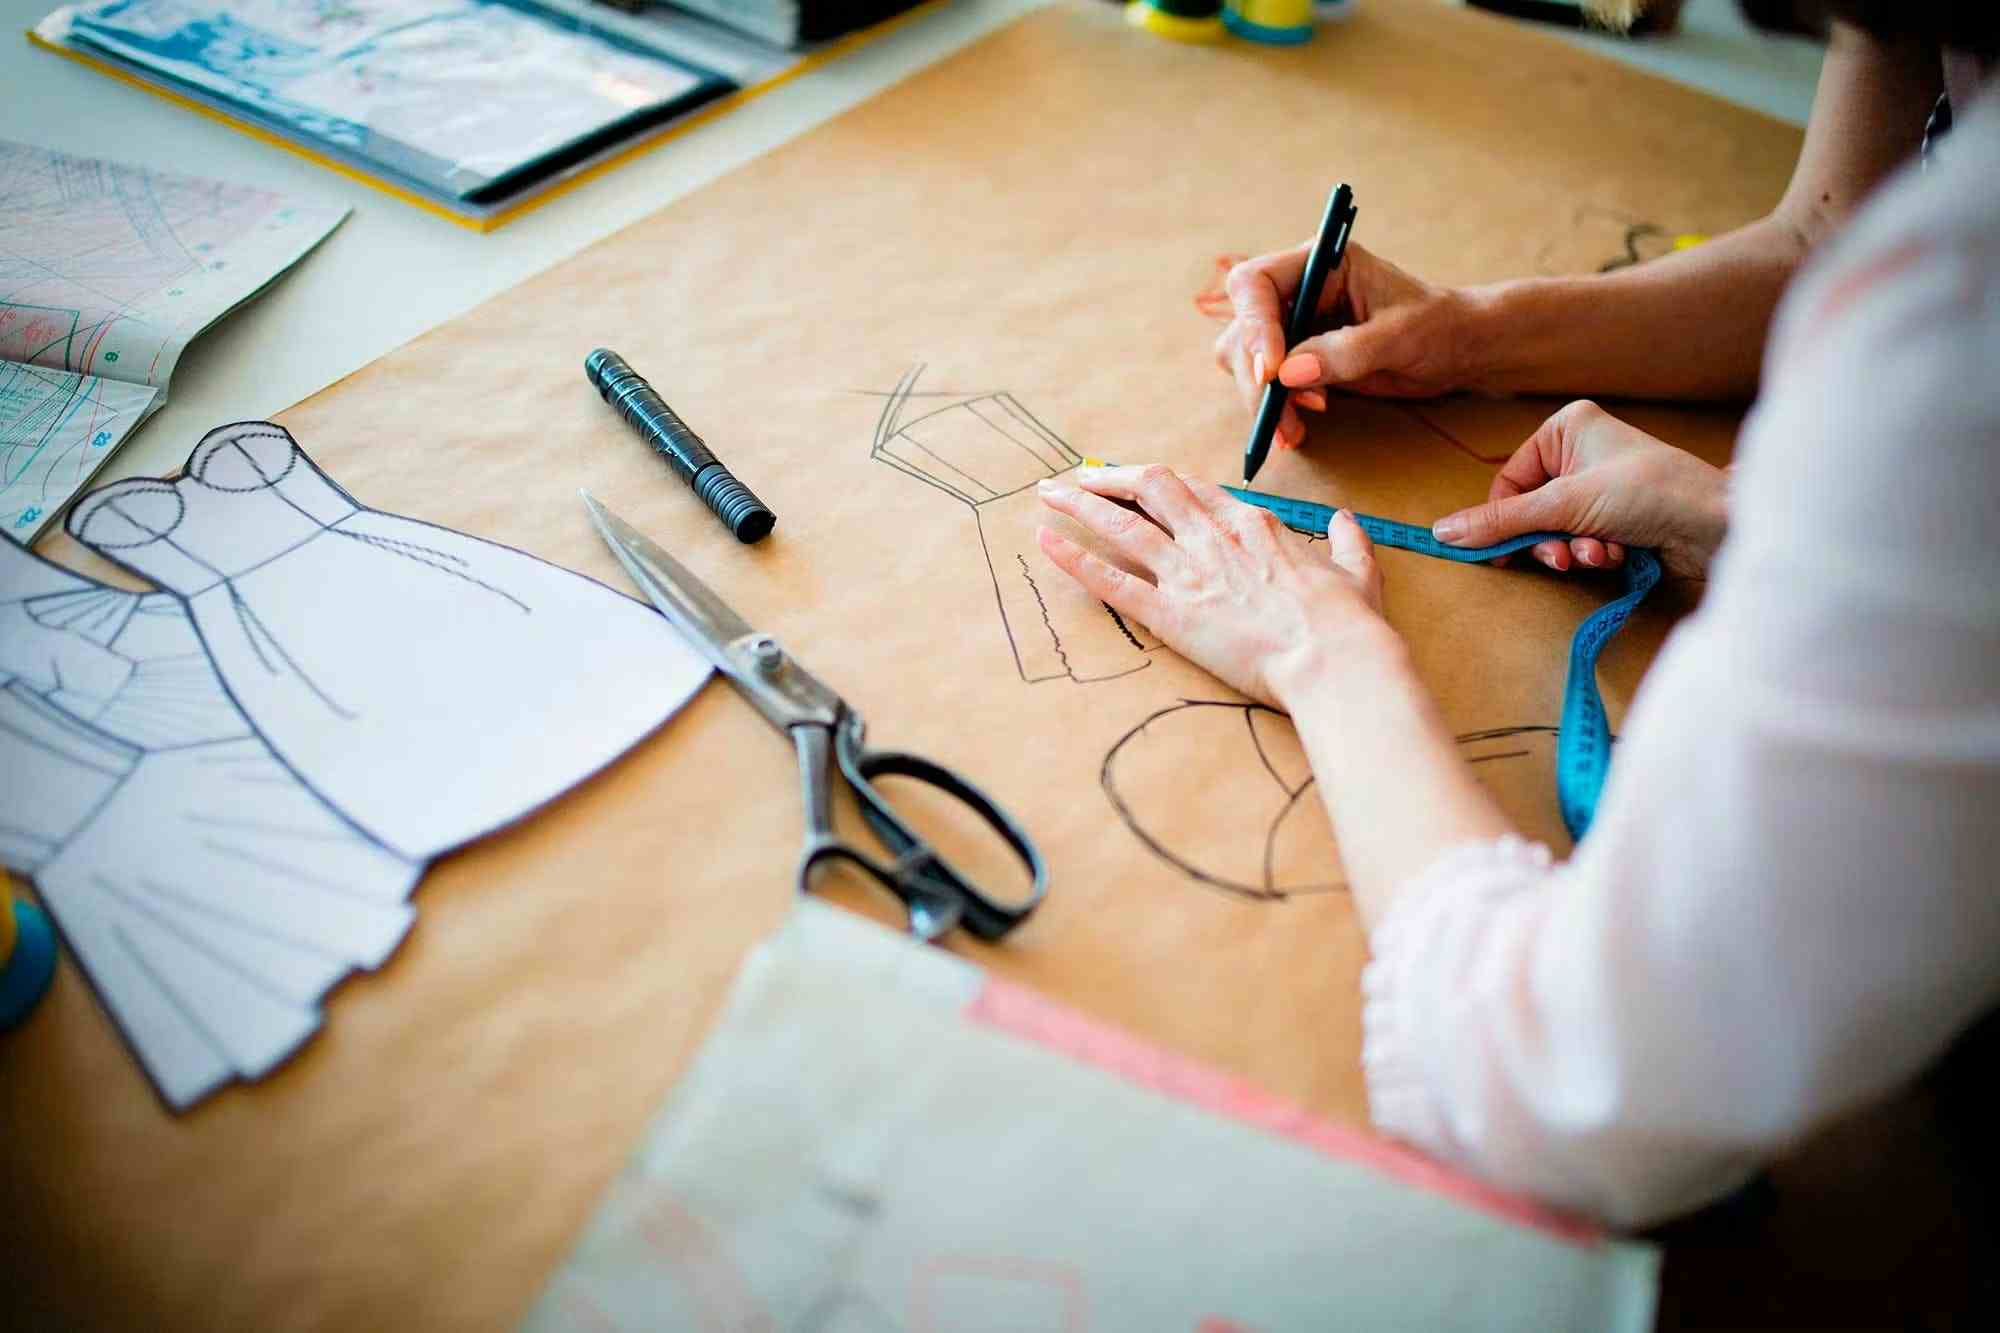 Student working on fashion design project